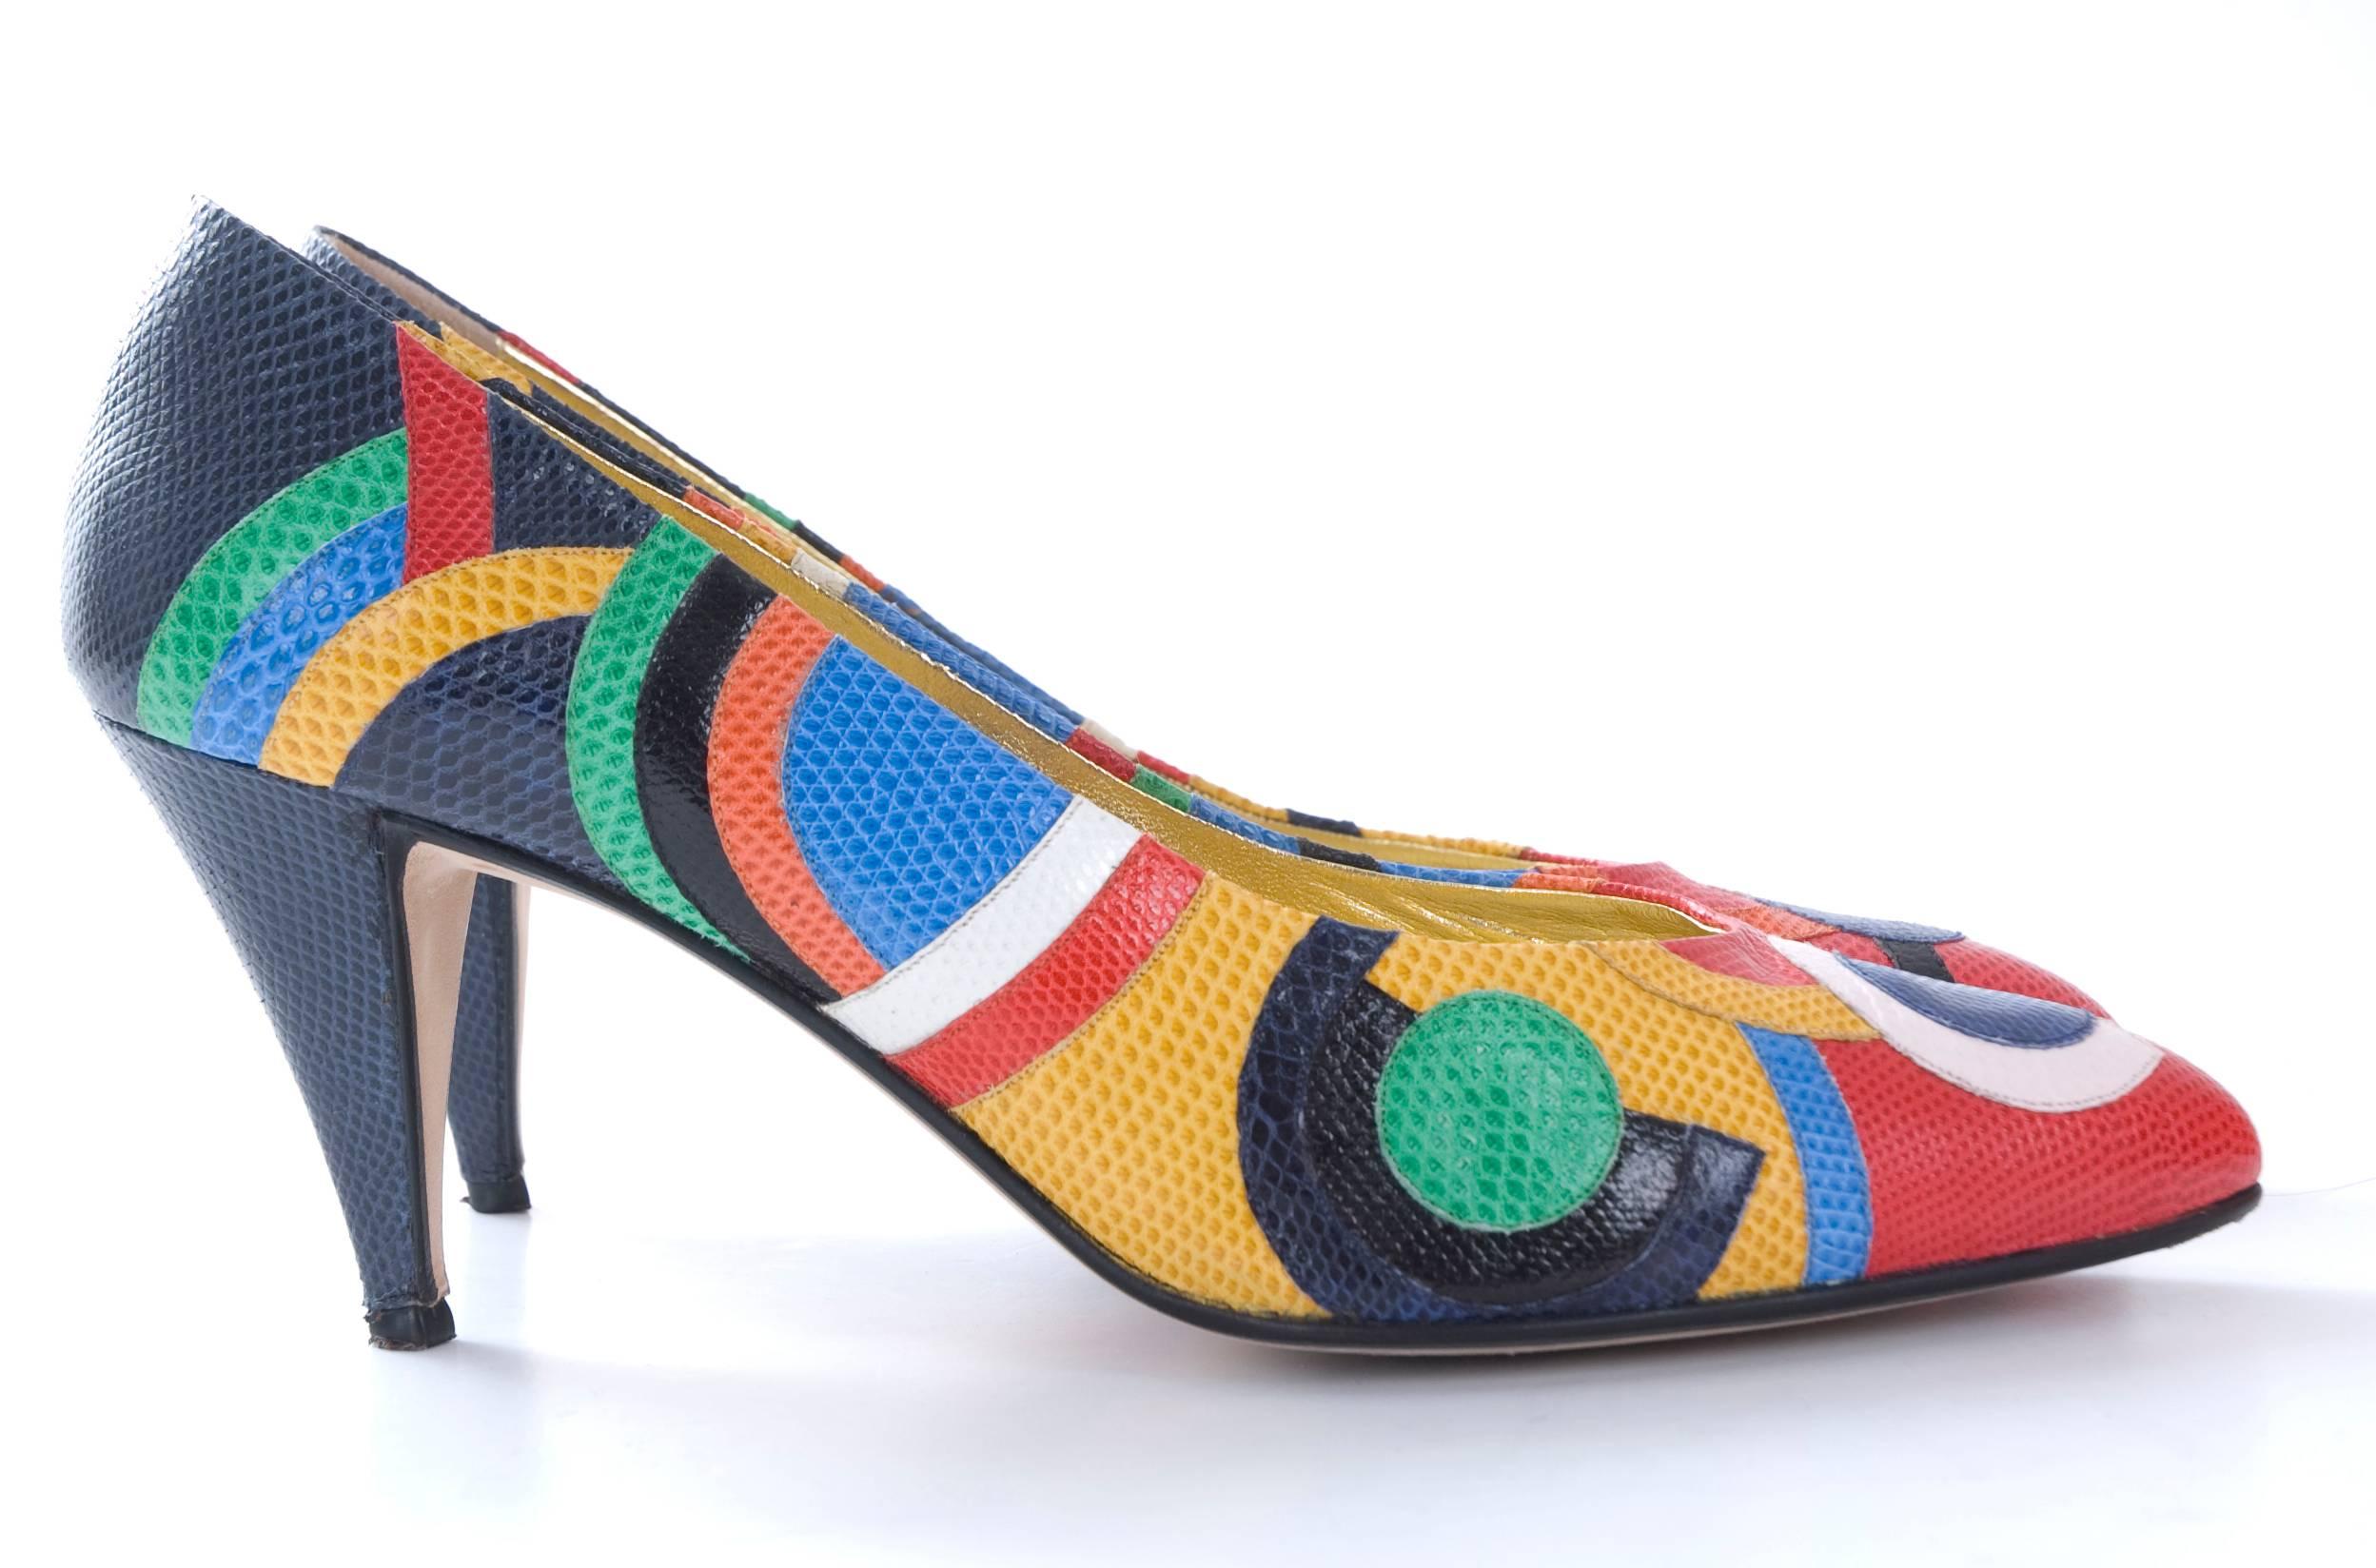 1980s Andrea Pfister Karung snakeskin high heels in a colorful pattern.
Colors are: Navy, red, yellow, blue, black,orange and green.
They have been worn on a photo shoot for 15 minutes and in excellent condition. Come in the original Box.
Museums